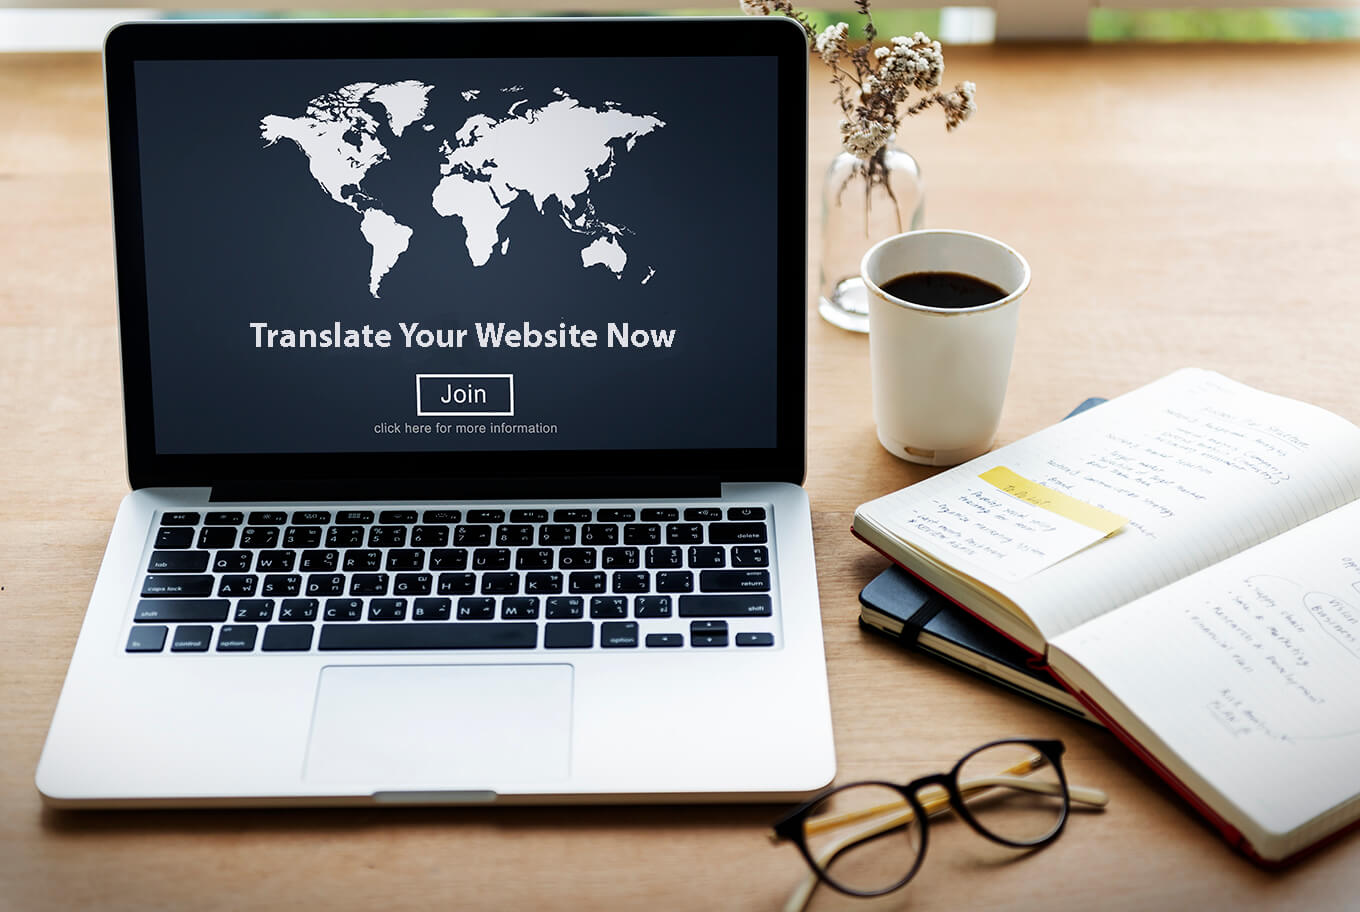 Translate Your website now